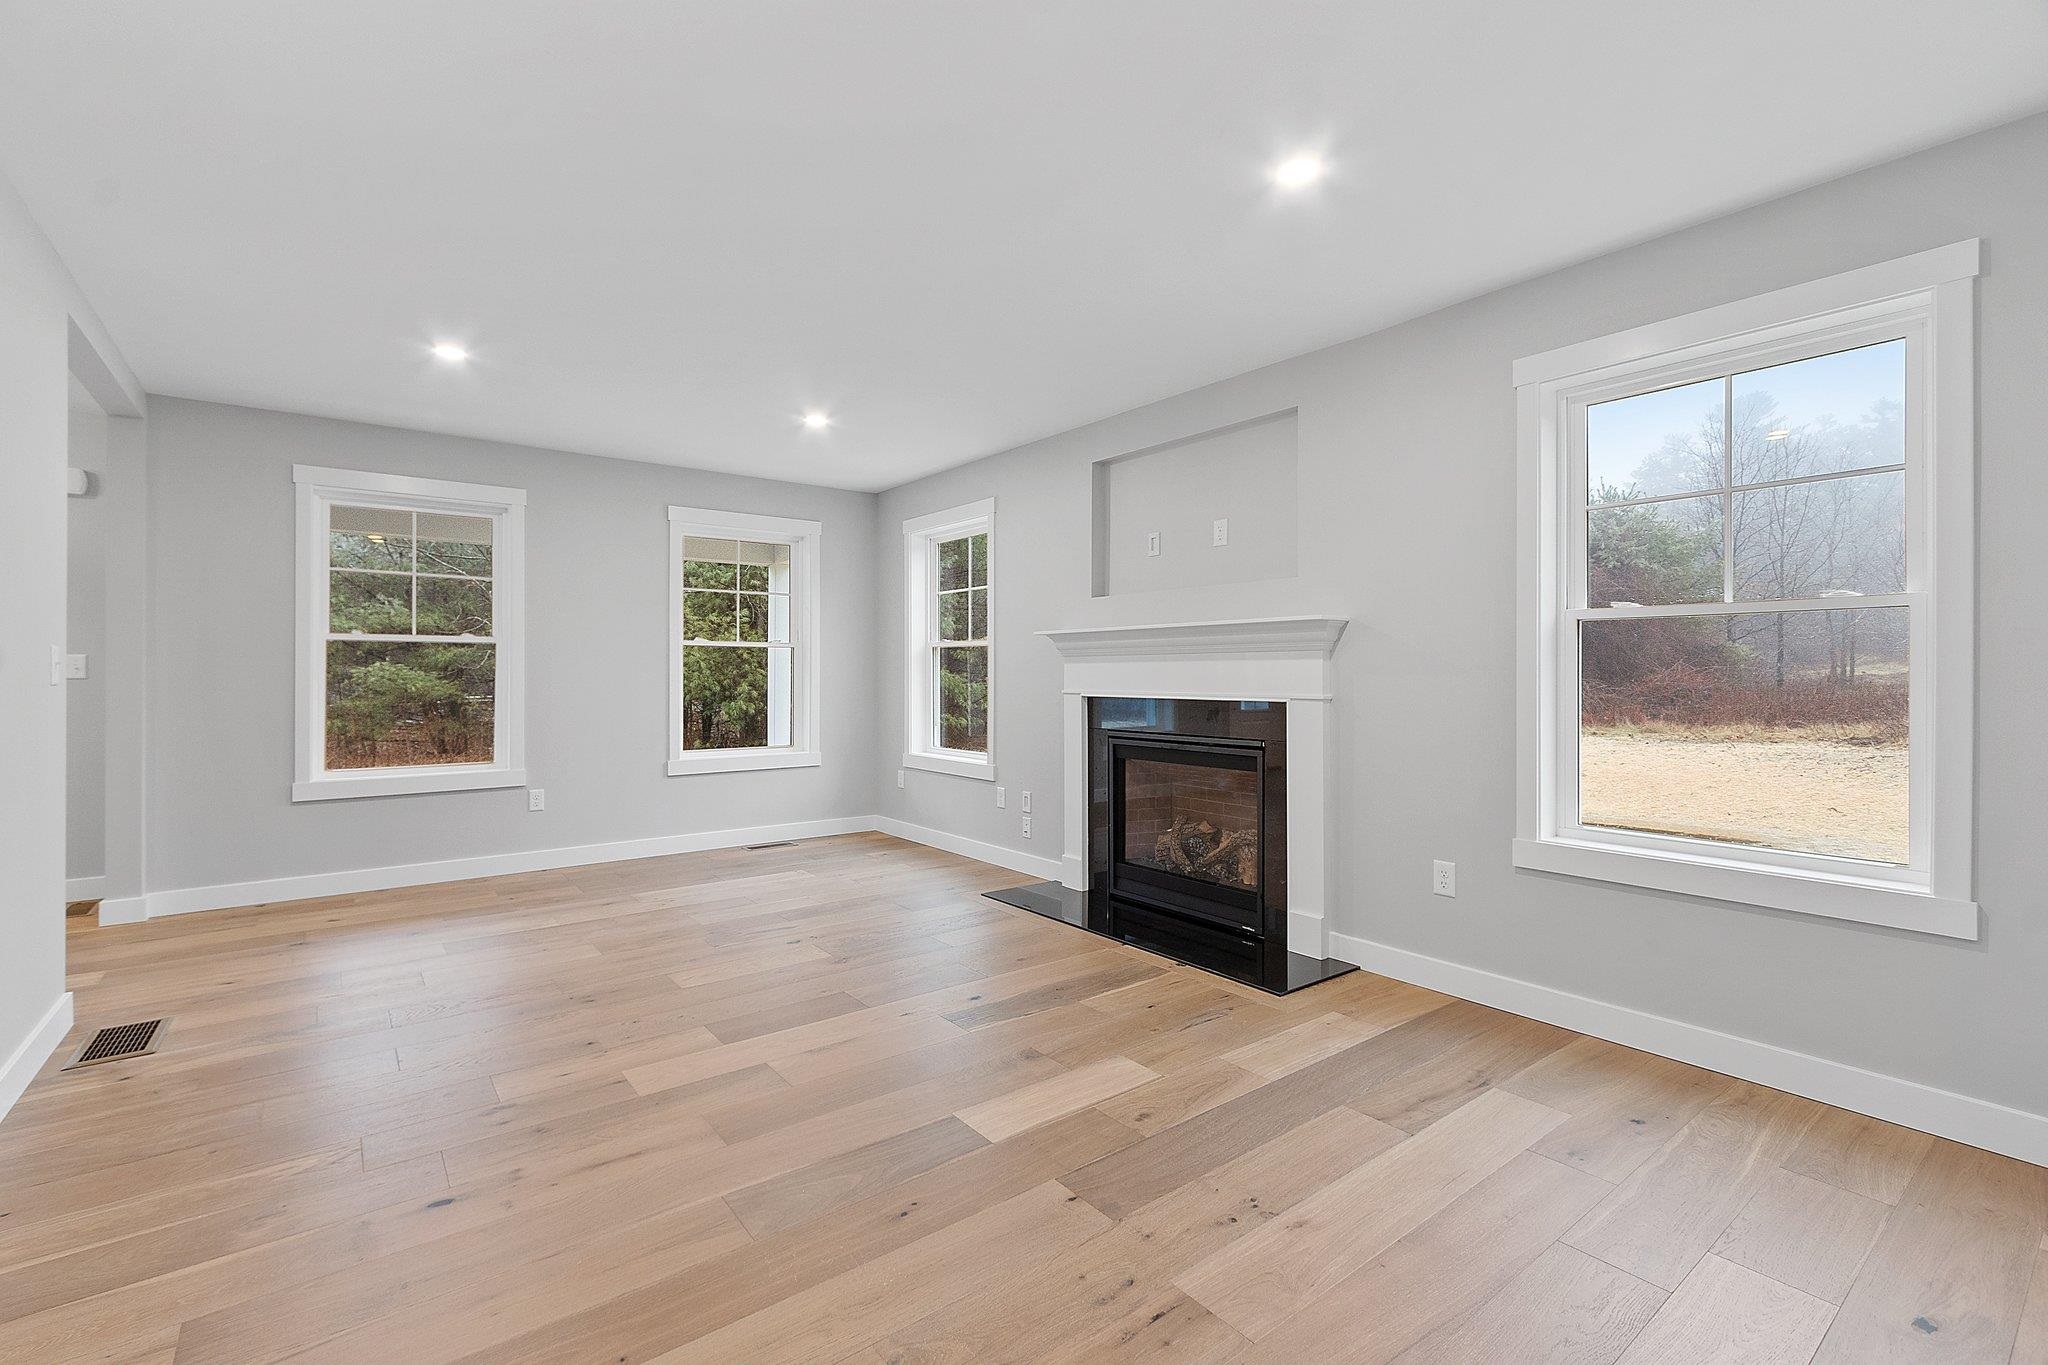 RECESSED LIGHTING IN FAMILY ROOM